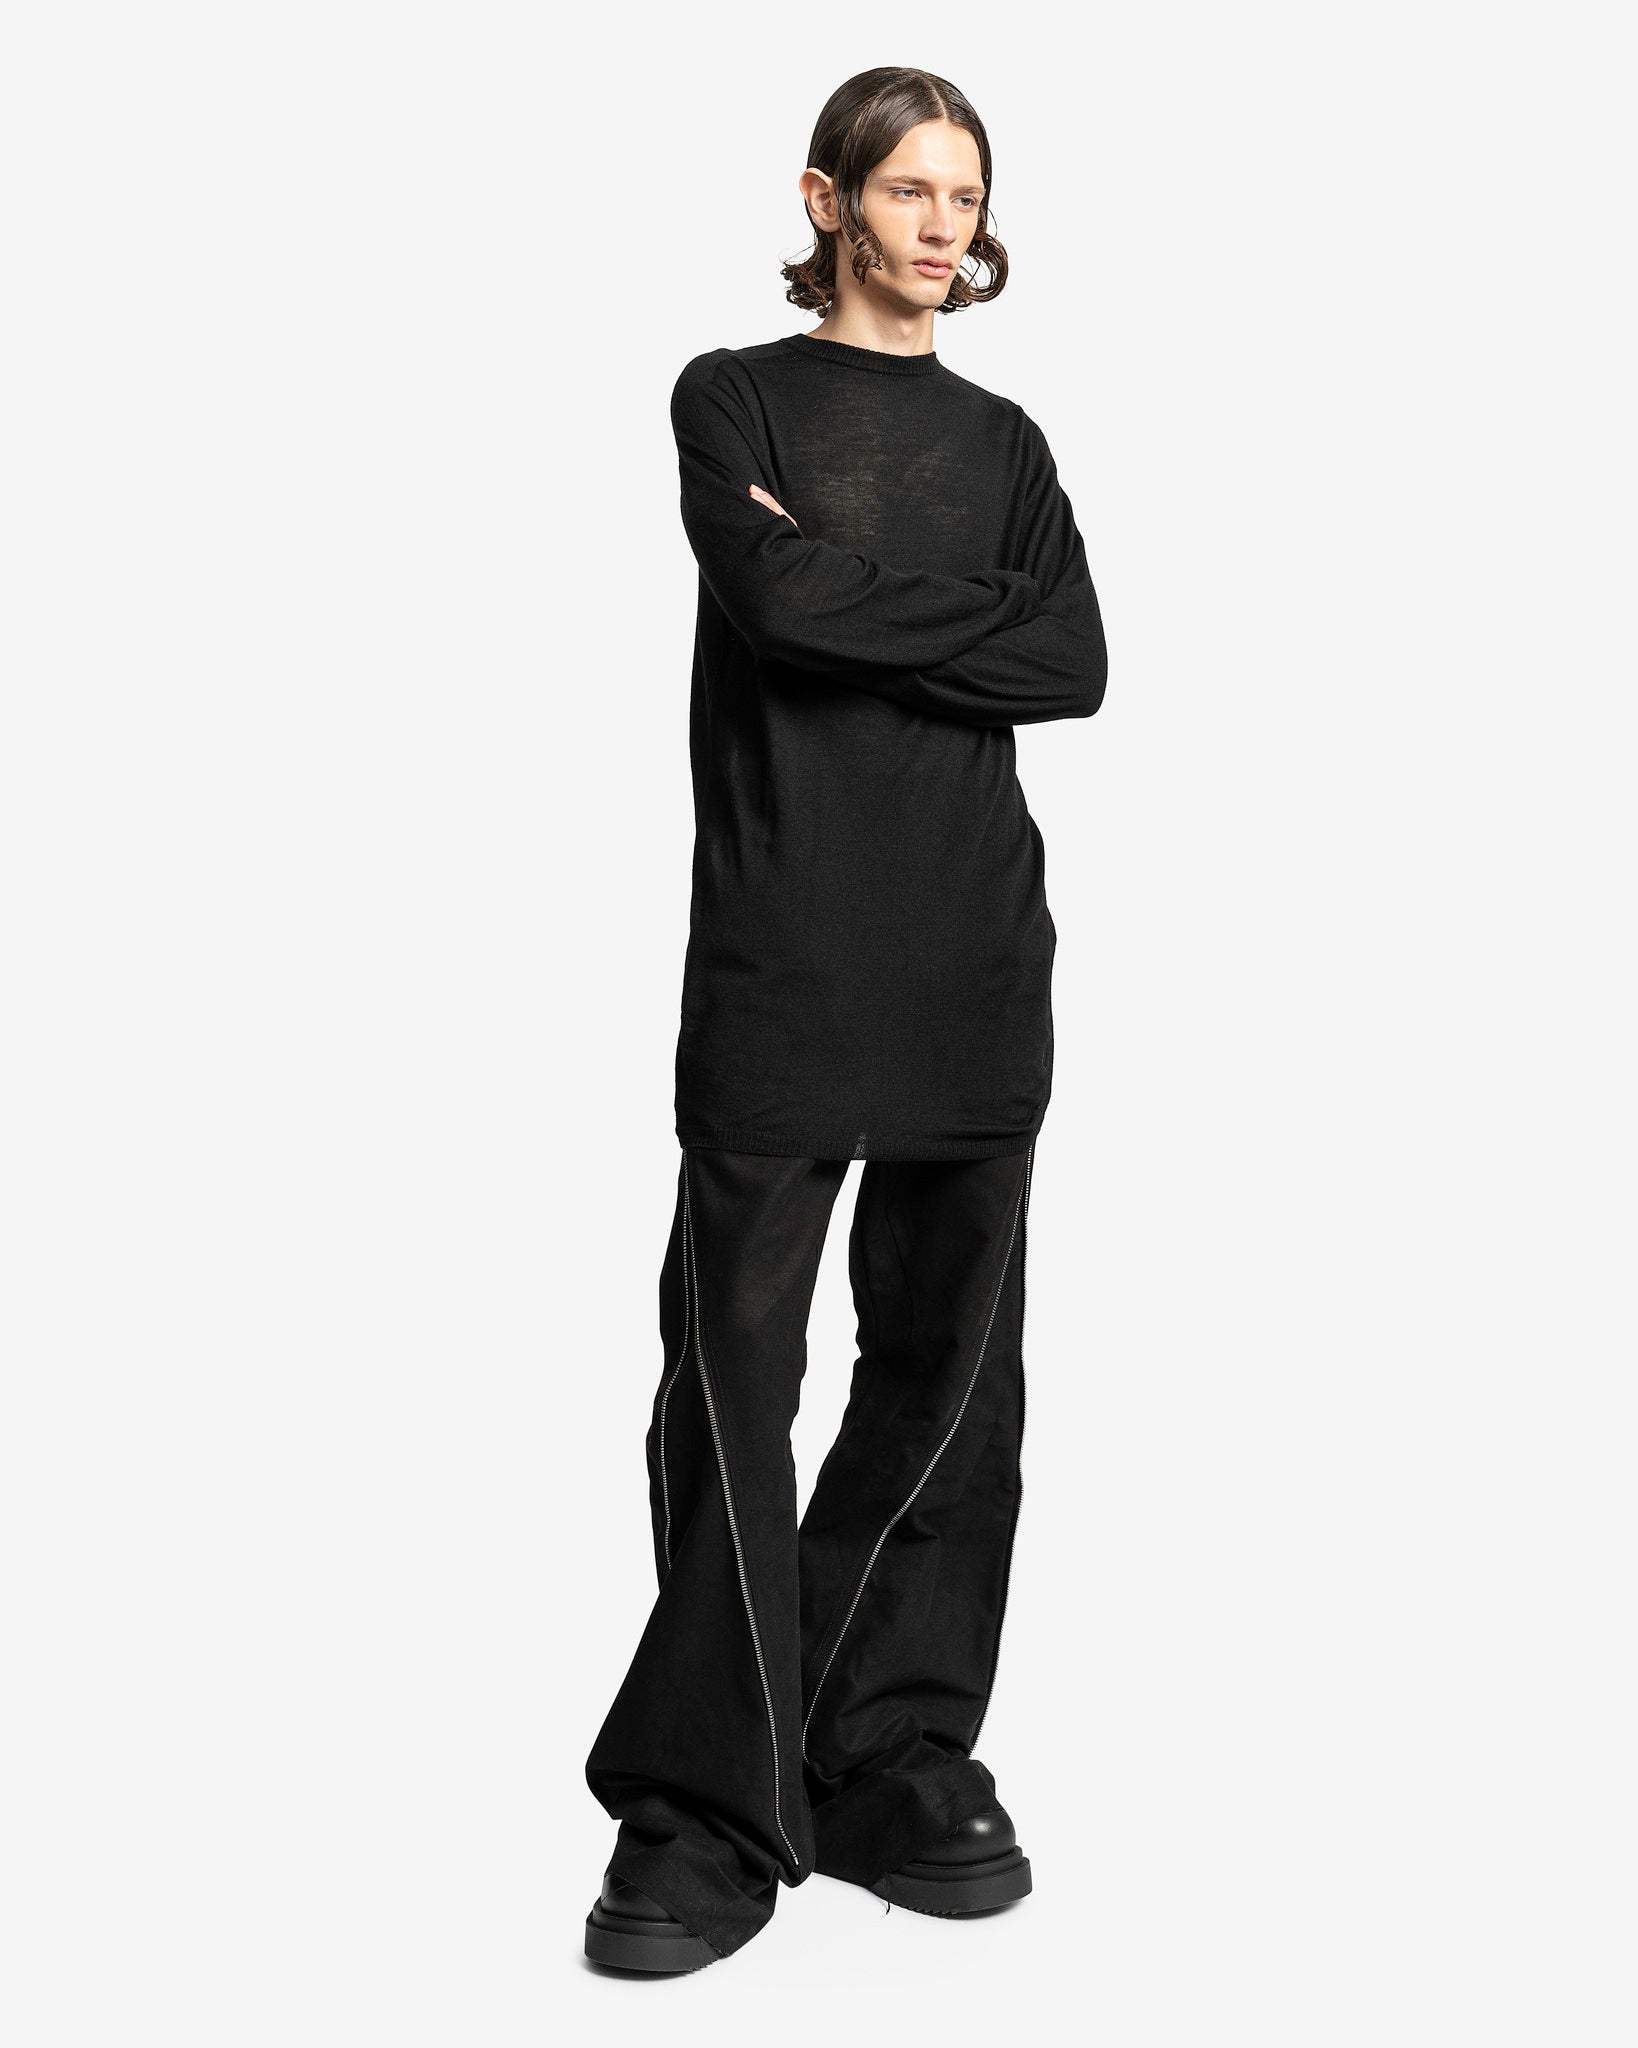 Rick Owens Men's Sweater O/S Oversized Round Neck in Black